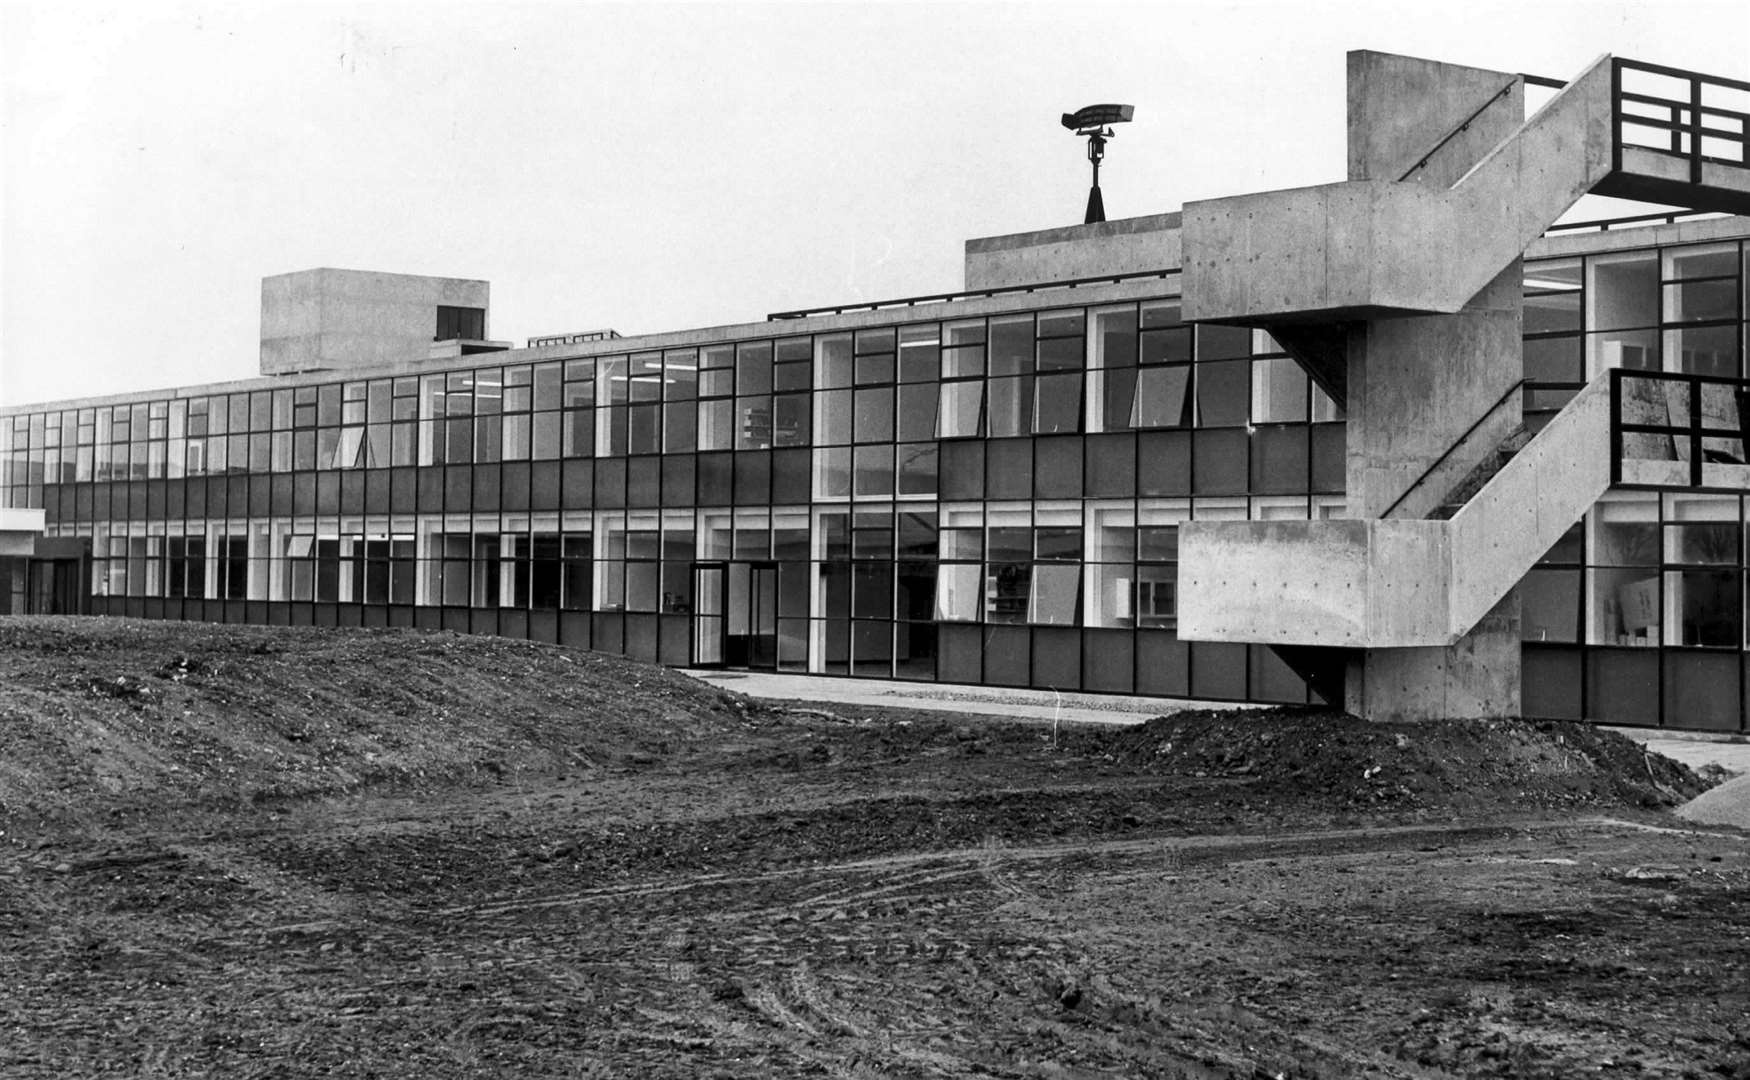 Chatham Technical School pictured in October 1968